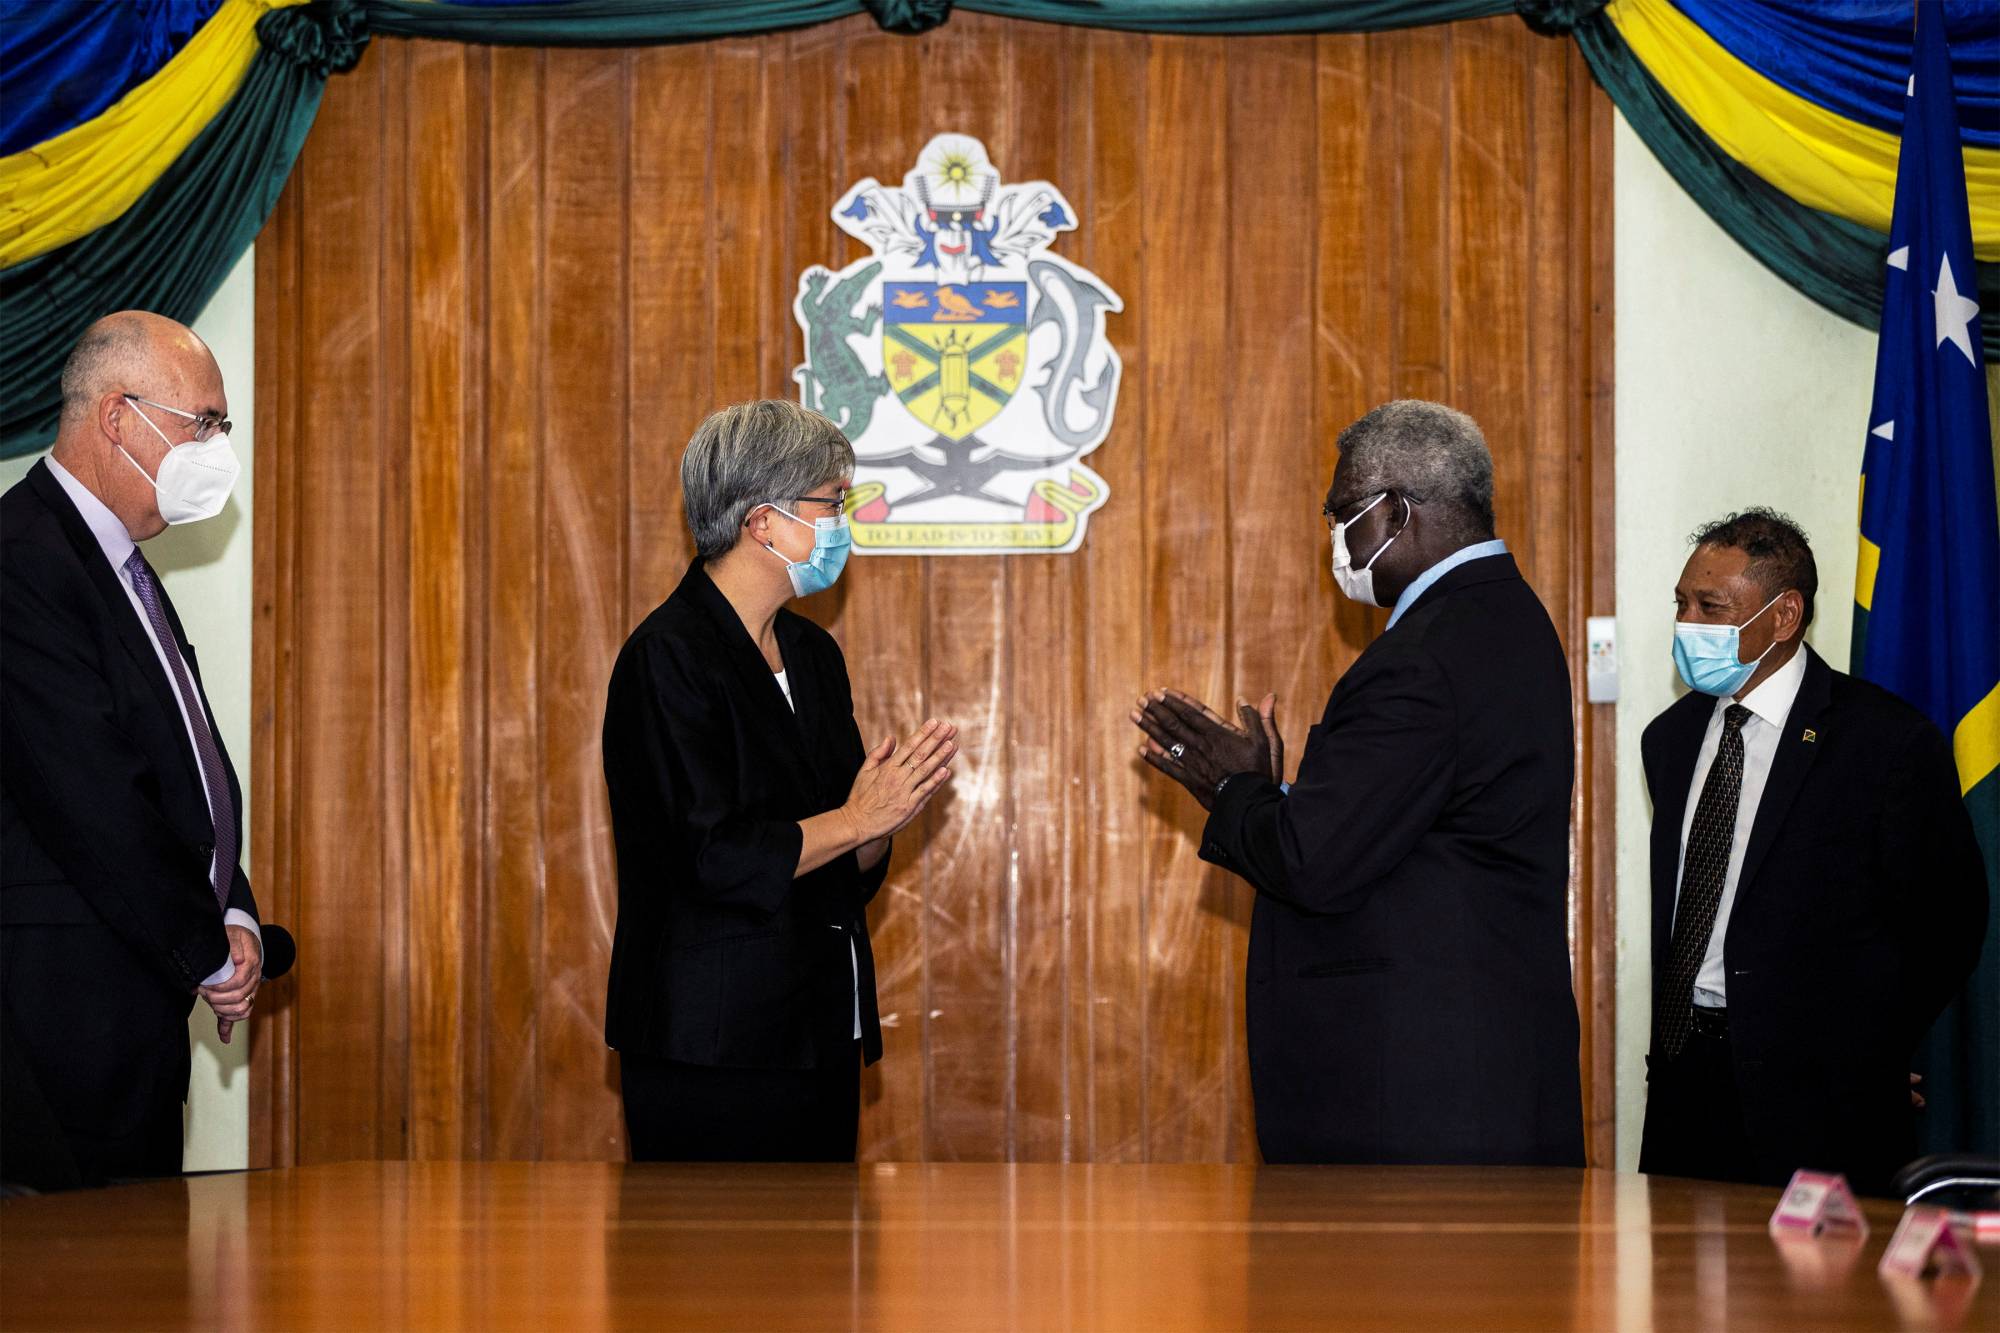 Australian Foreign Minister Penny Wong meets Solomon Islands Prime Minister Manasseh Sogavare in Honiara, Solomon Islands, on June 17. | AUSTRALIA DEPARTMENT OF FOREIGN AFFAIRS AND TRADE / VIA REUTERS